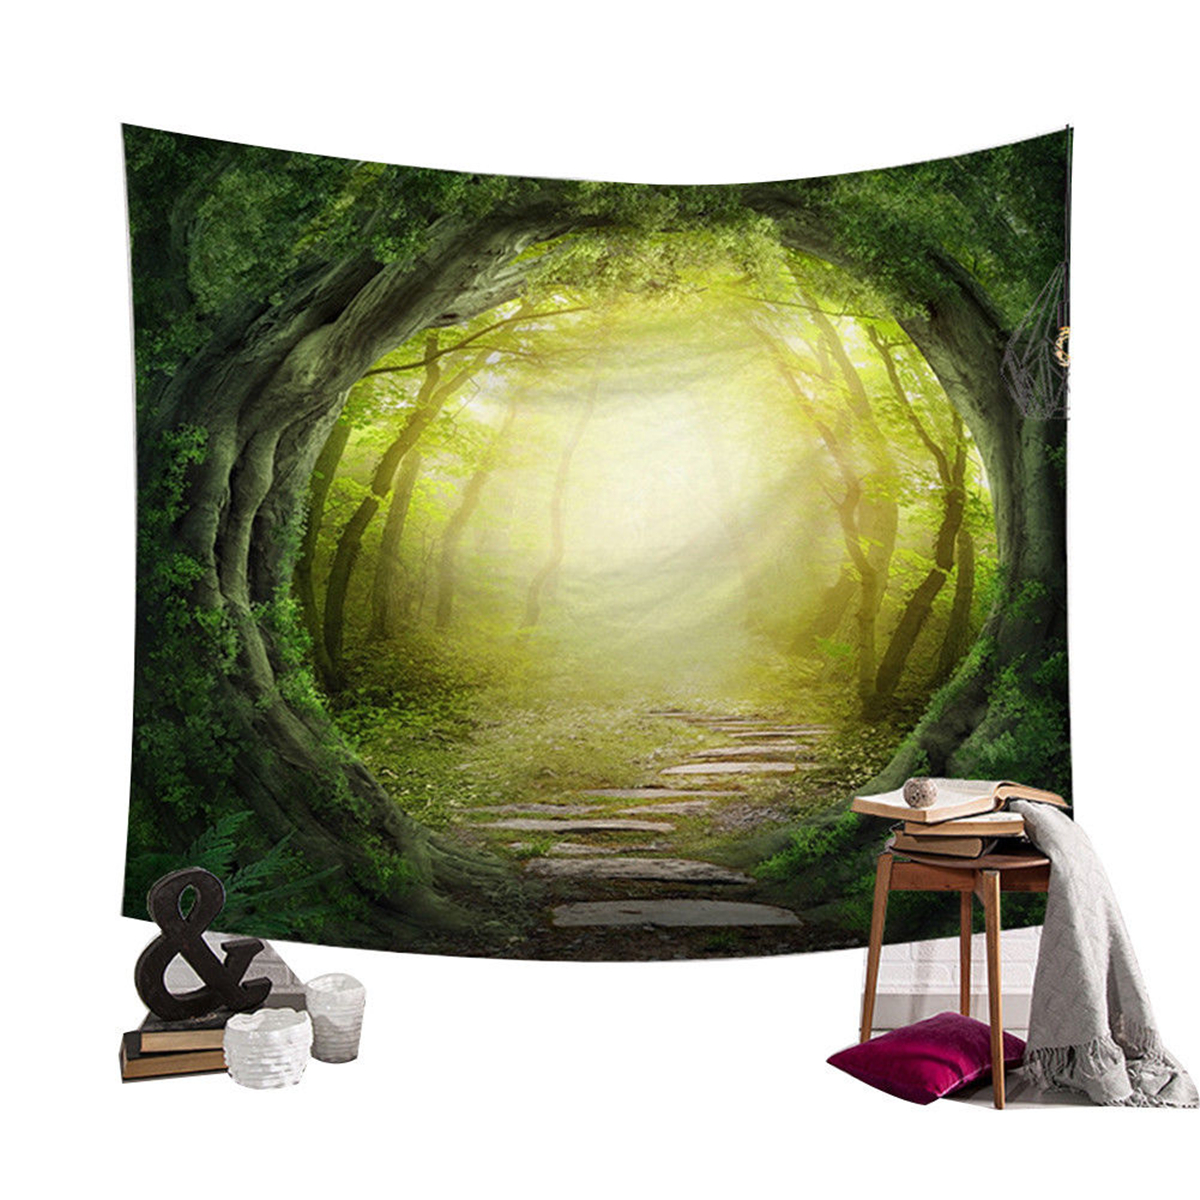 Fairy-Forest-Hanging-Wall-Tapestry-Bohemian-Hippie-Throw-Bedspread-Home-Decorations-1309251-5